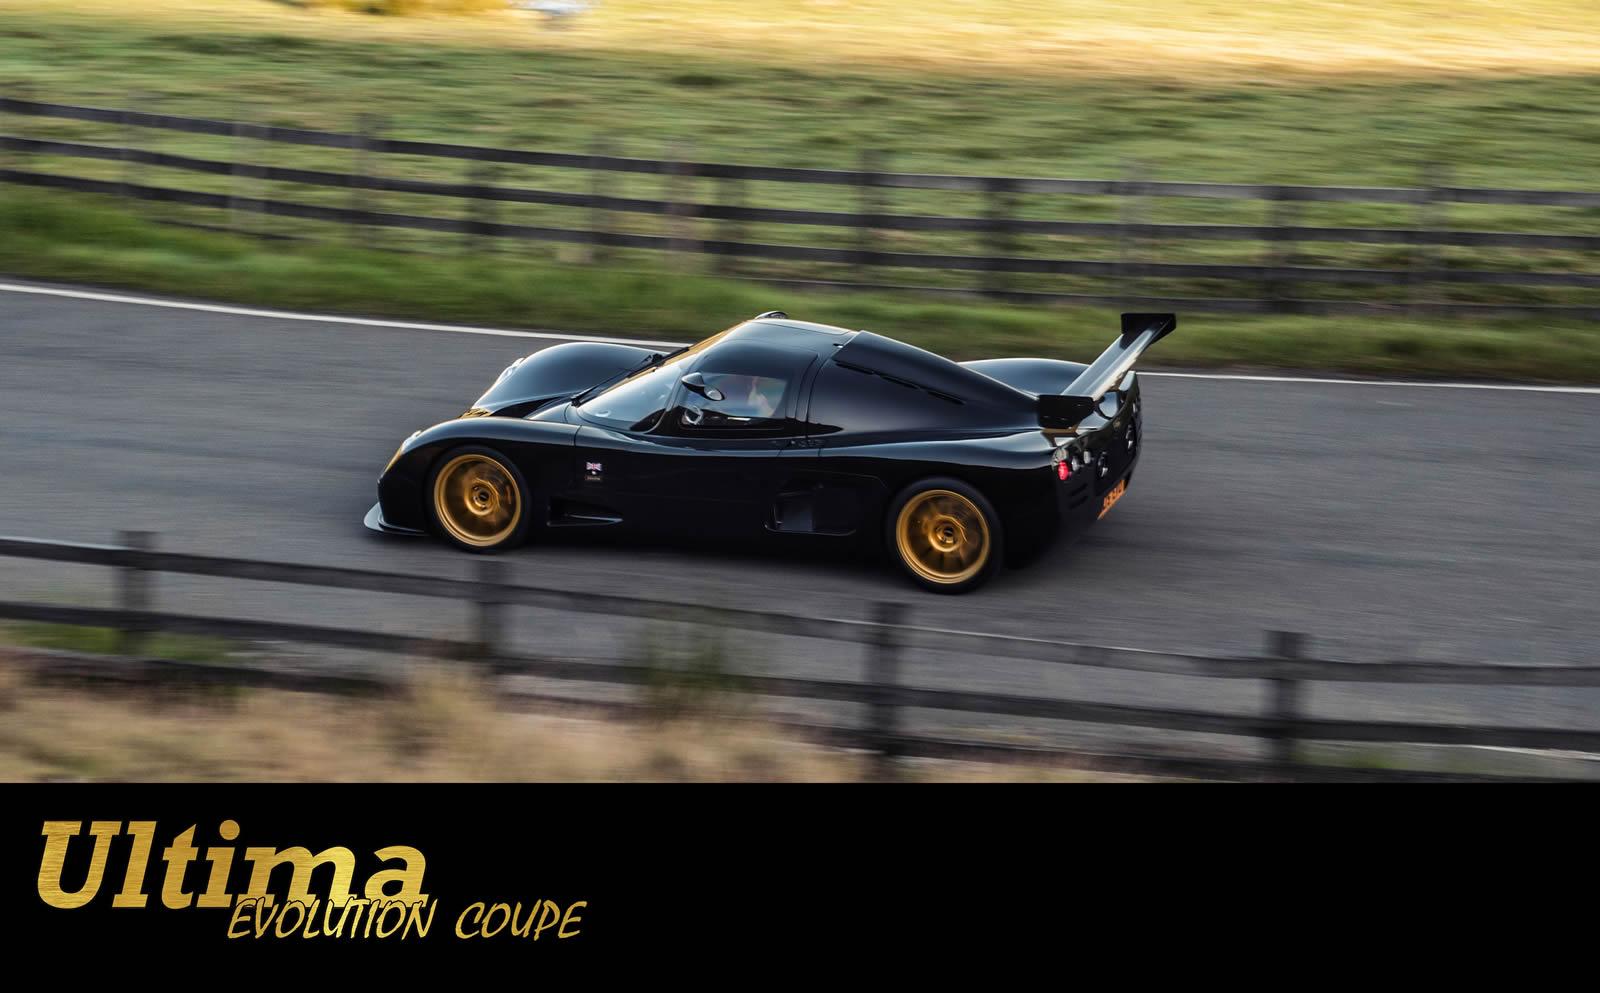 ultima-evolution-makes-video-debut-with-all-its-1020-horsepower-video-photo-gallery_17